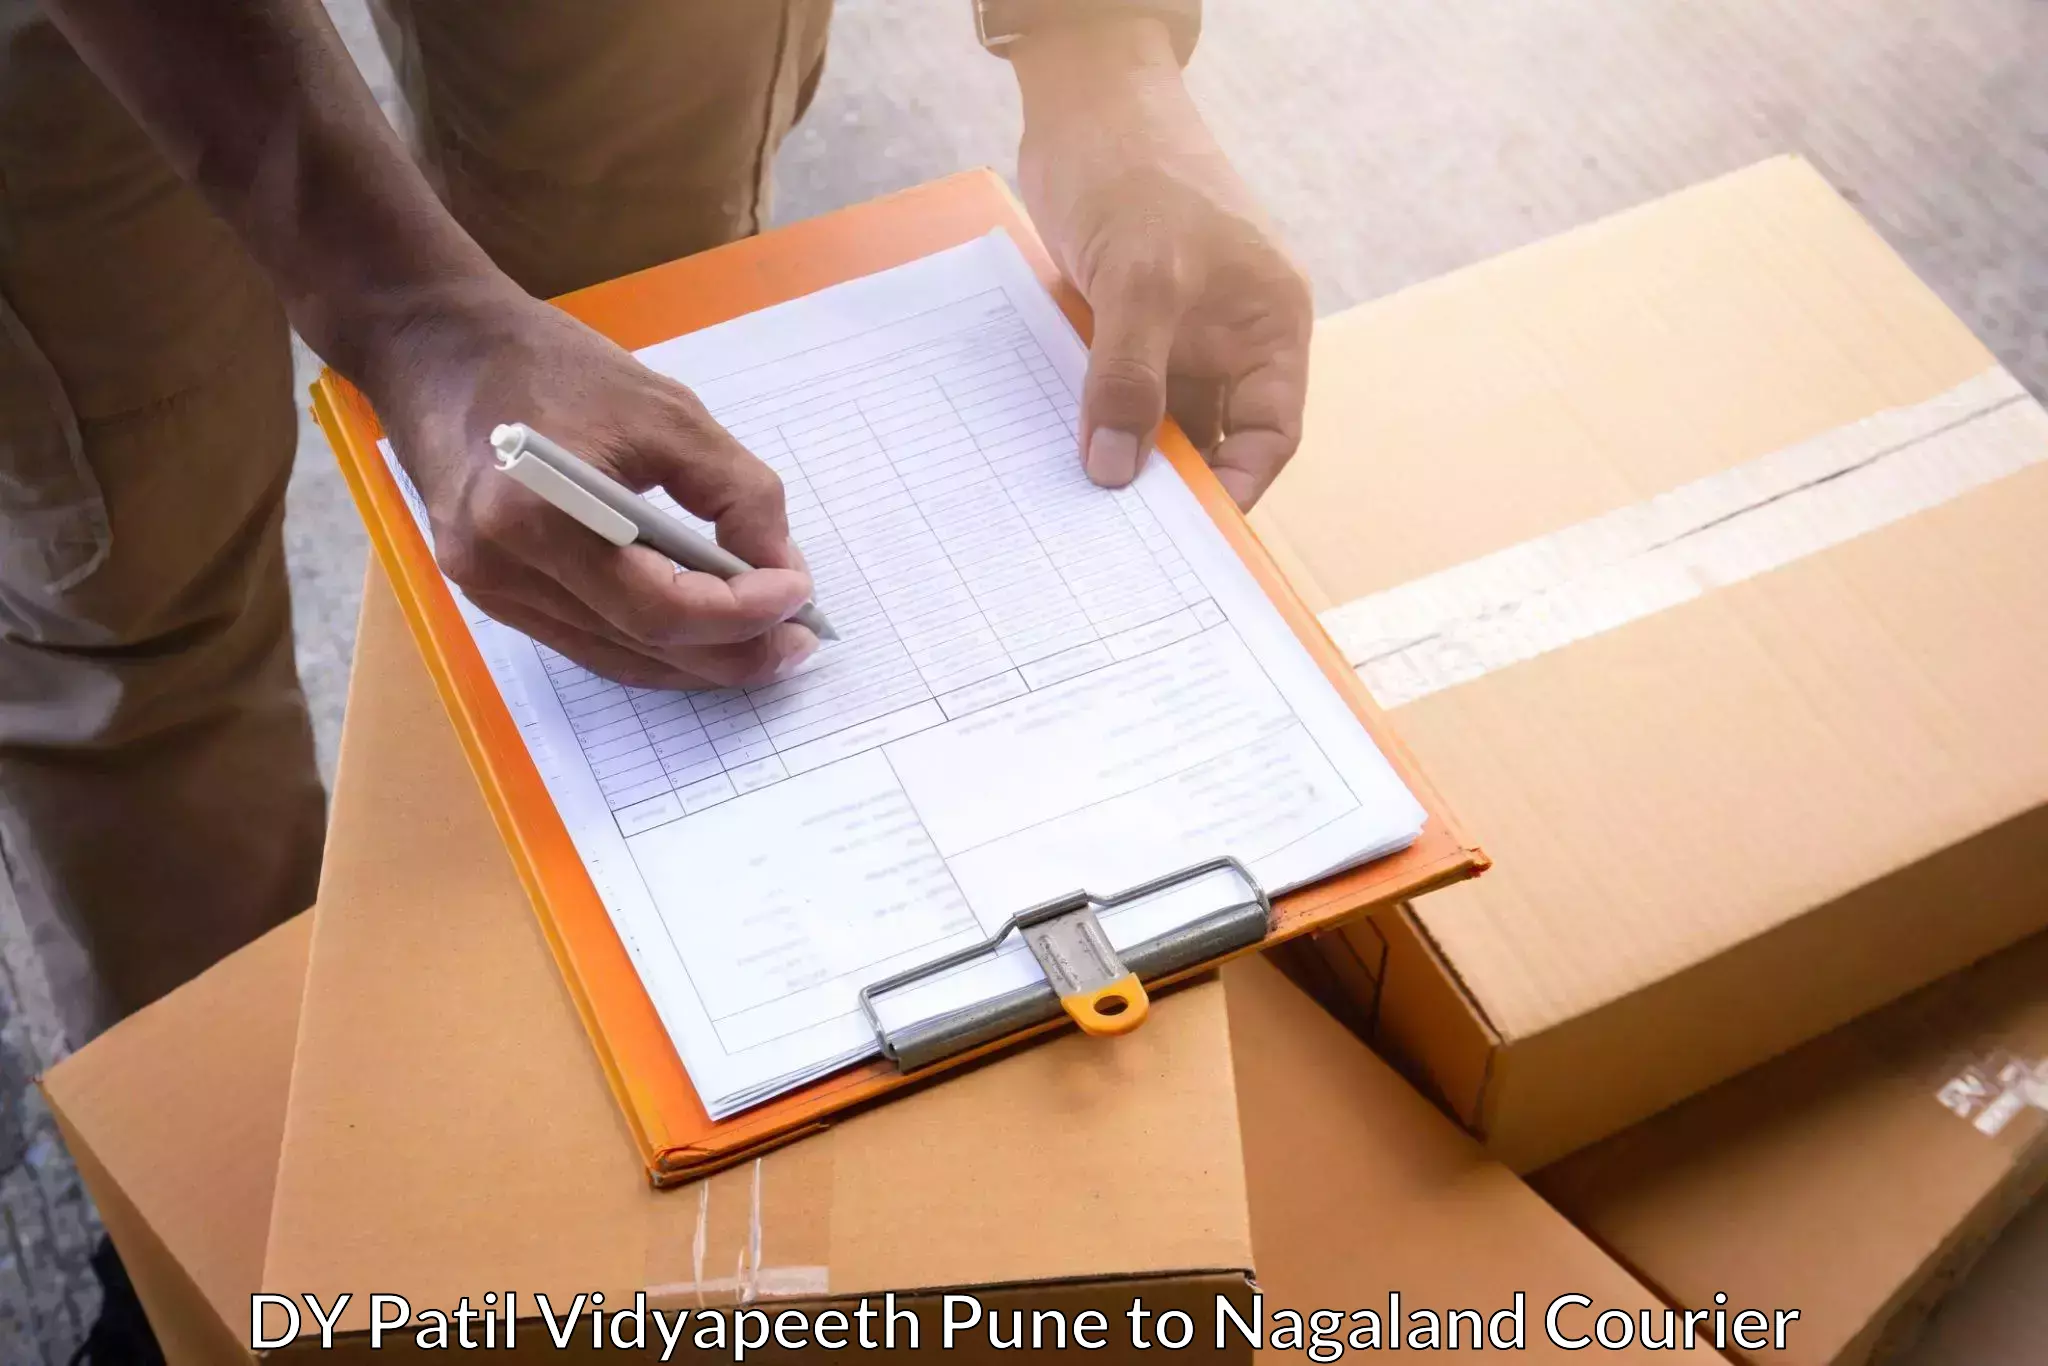 Expedited shipping methods DY Patil Vidyapeeth Pune to Kohima